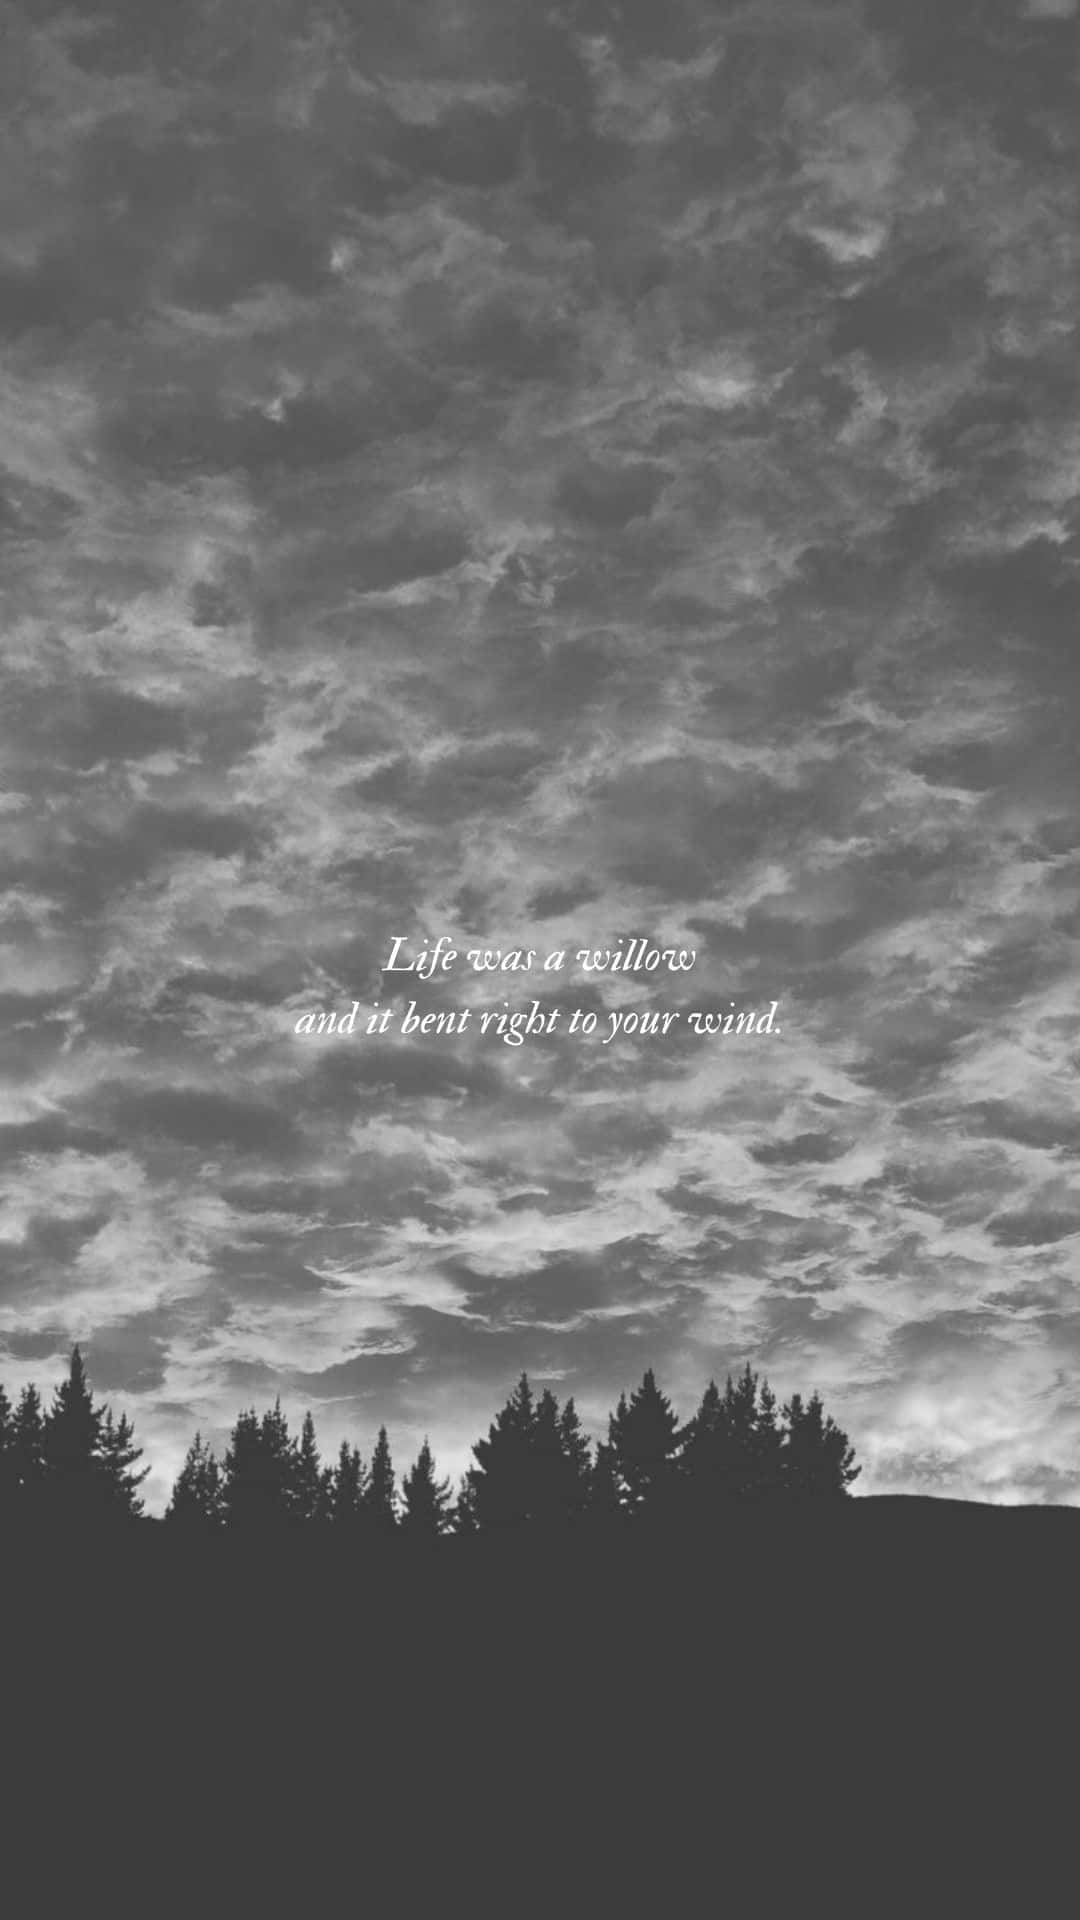 A black and white photo of a cloudy sky with a row of trees at the bottom. The sky has a quote in the middle that says 